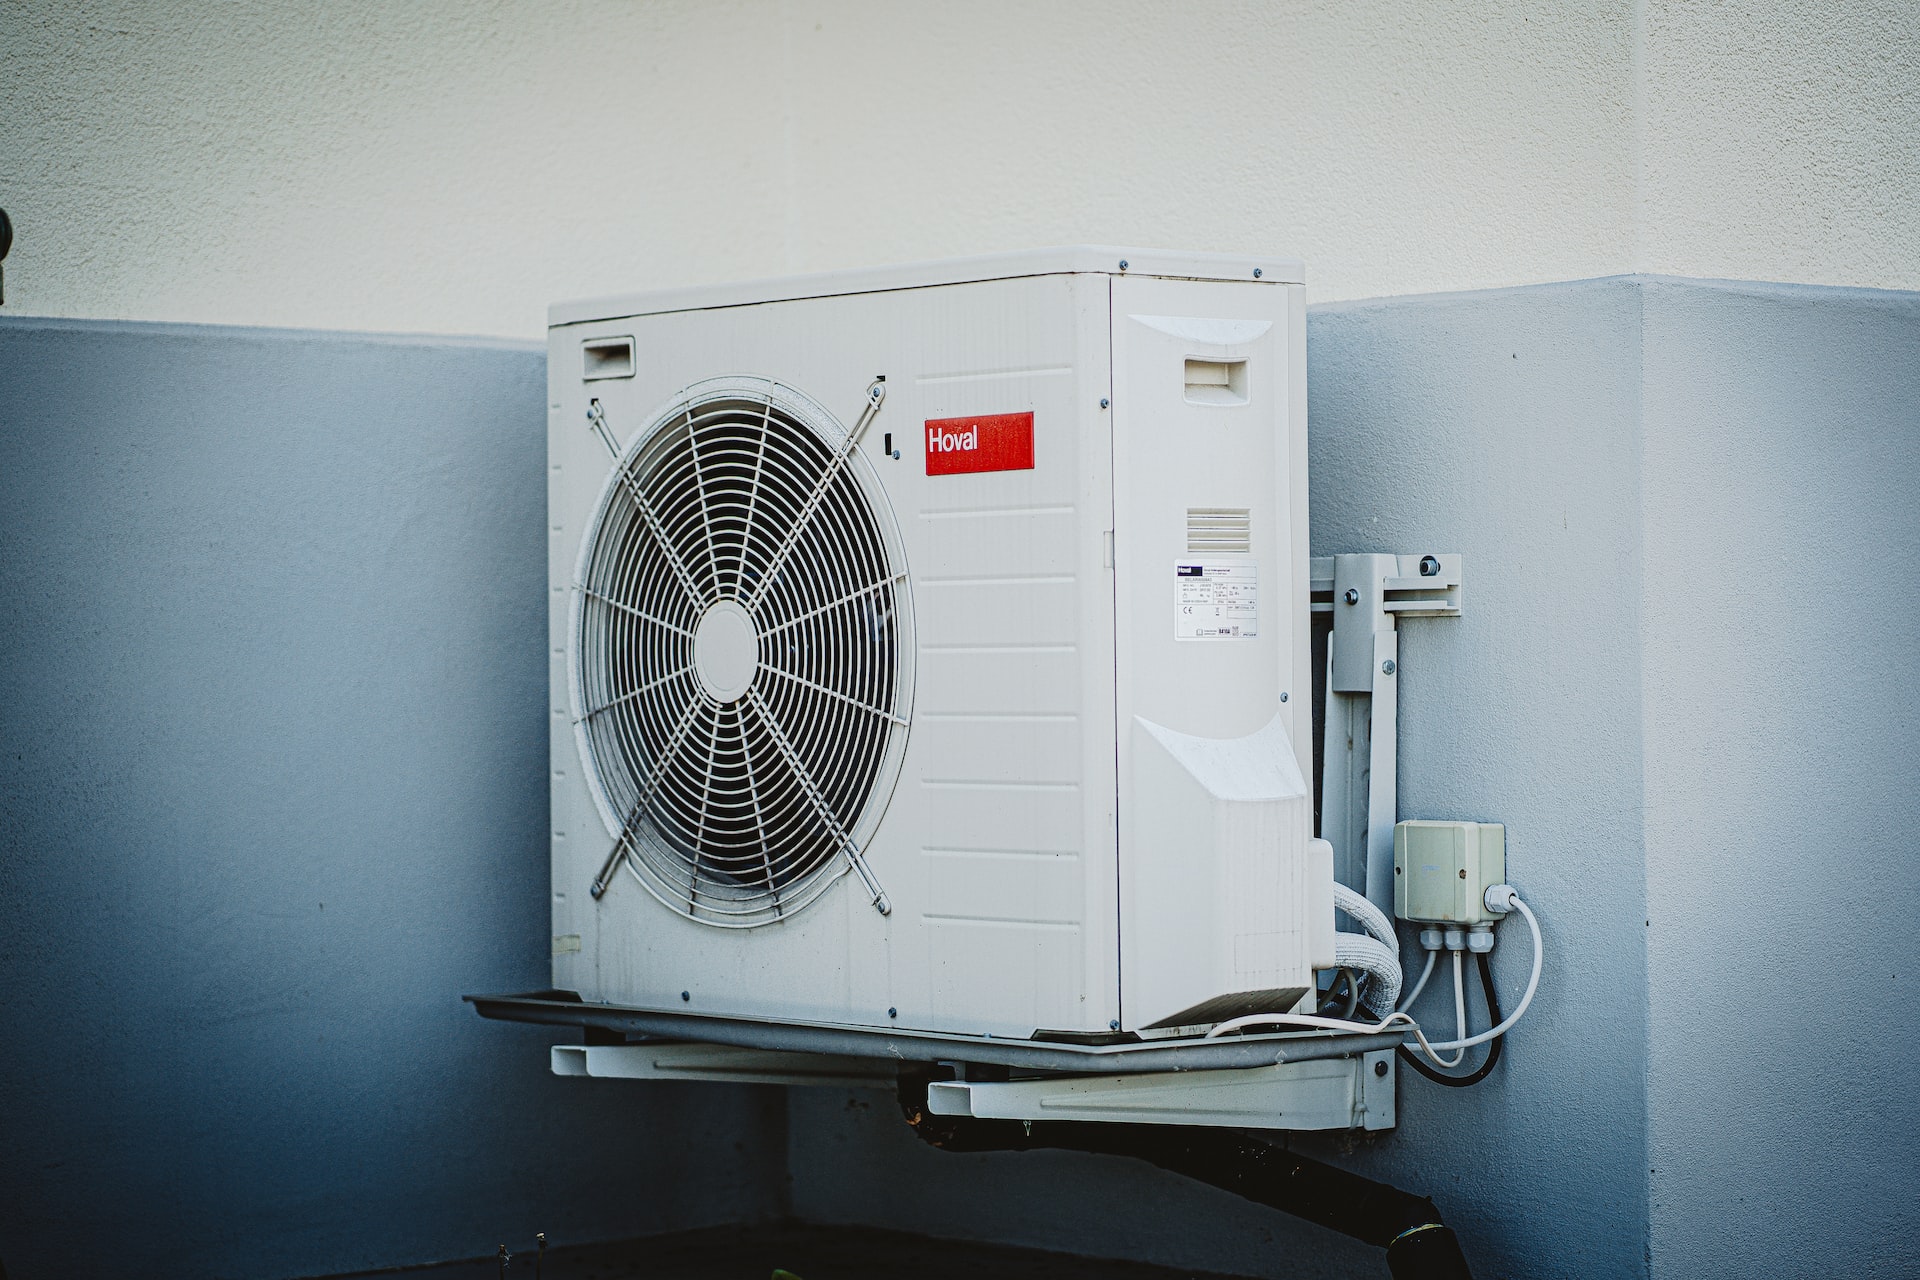 What to look for when buying an air conditioner?